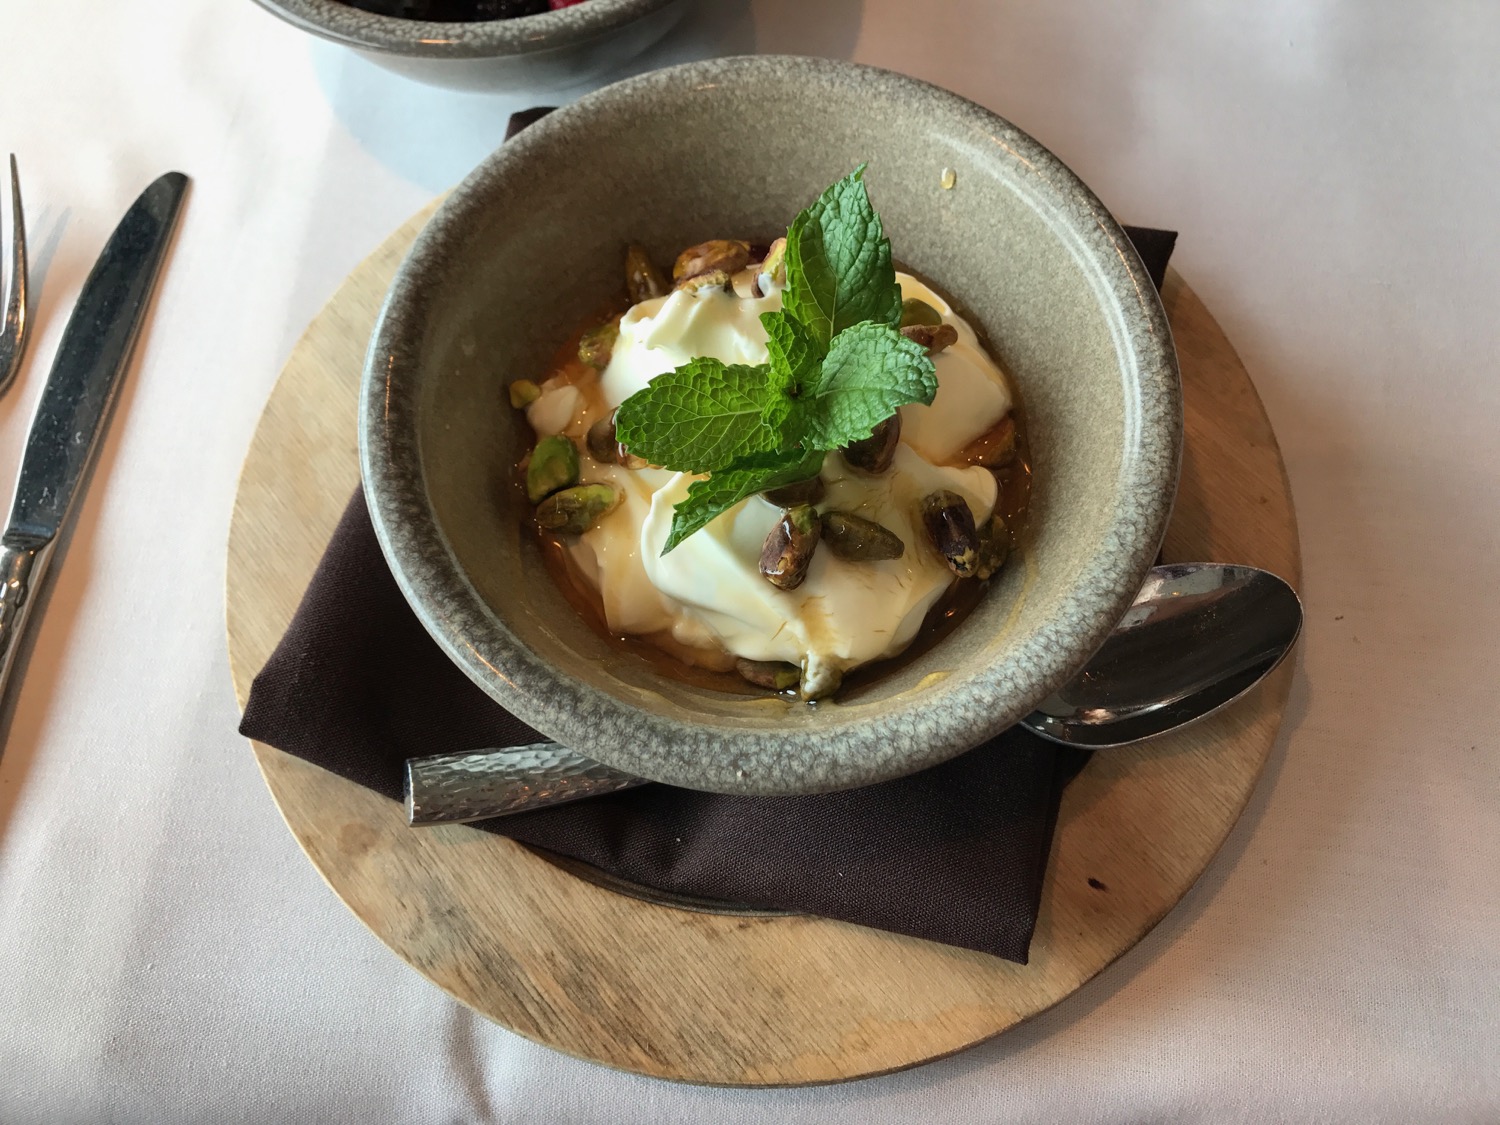 a bowl of food with a leaf of mint on top